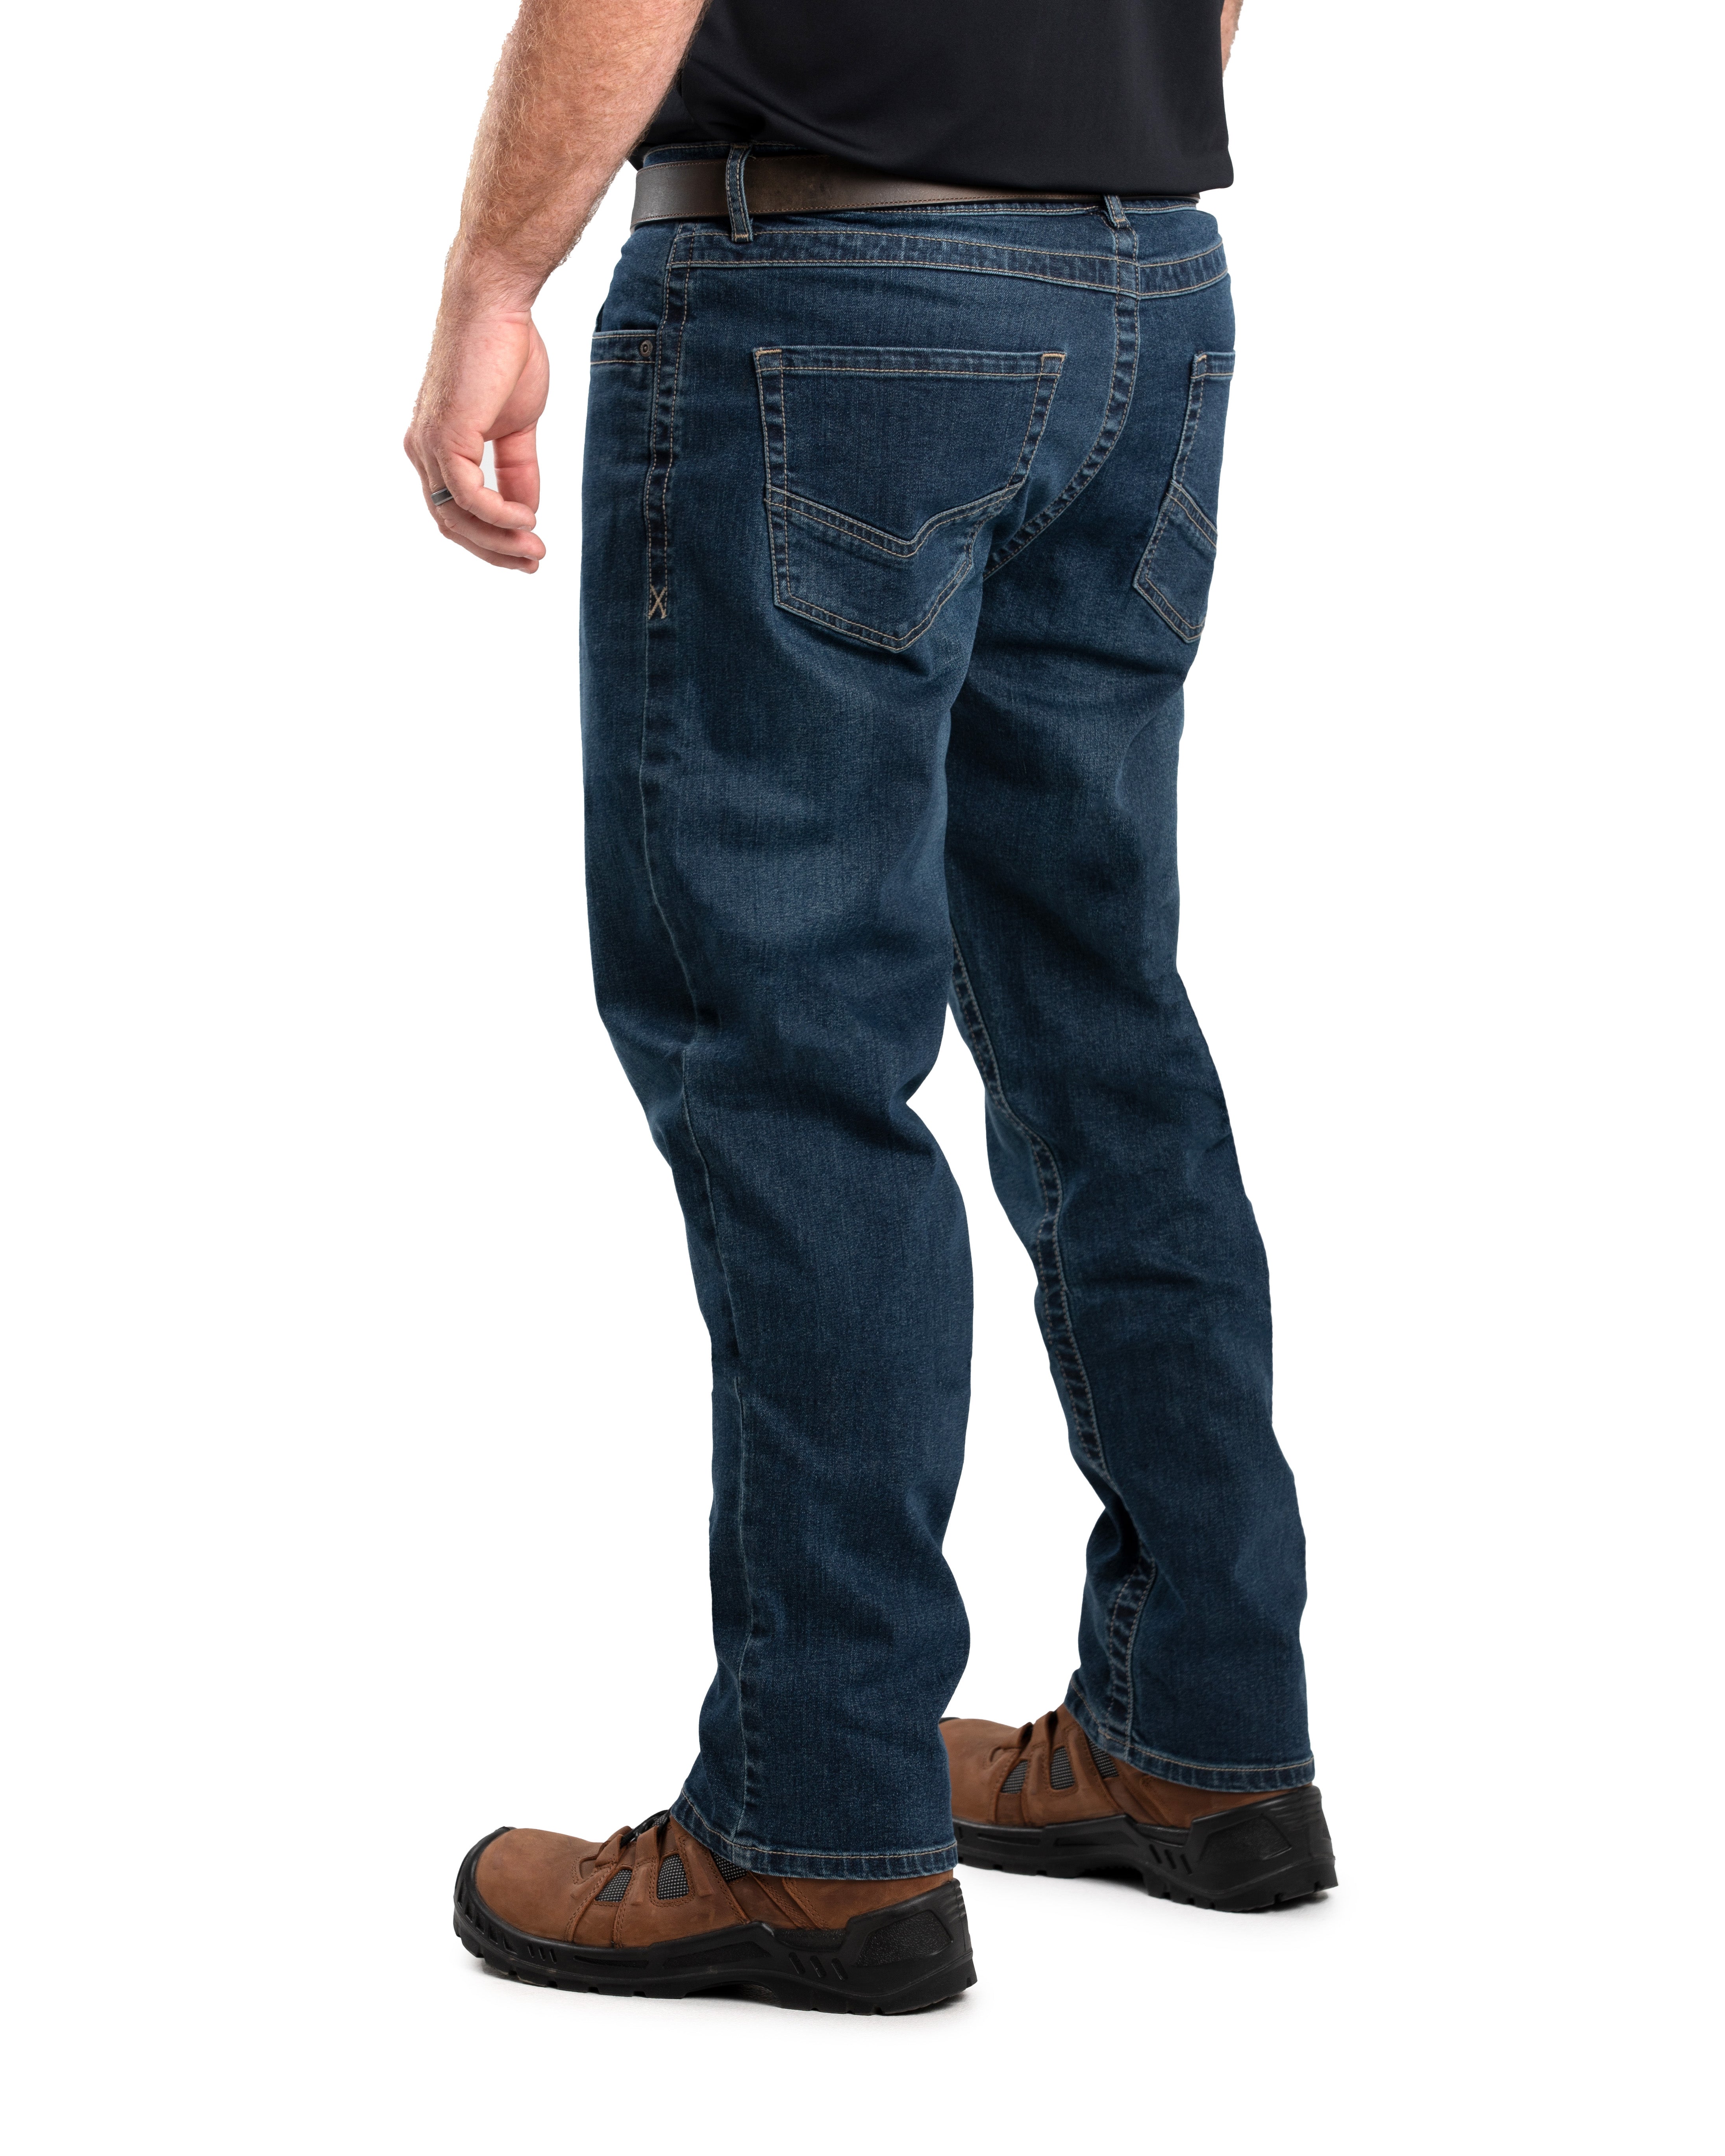 Berne Men's Highland Flex Relaxed Fit Bootcut Jeans at Tractor